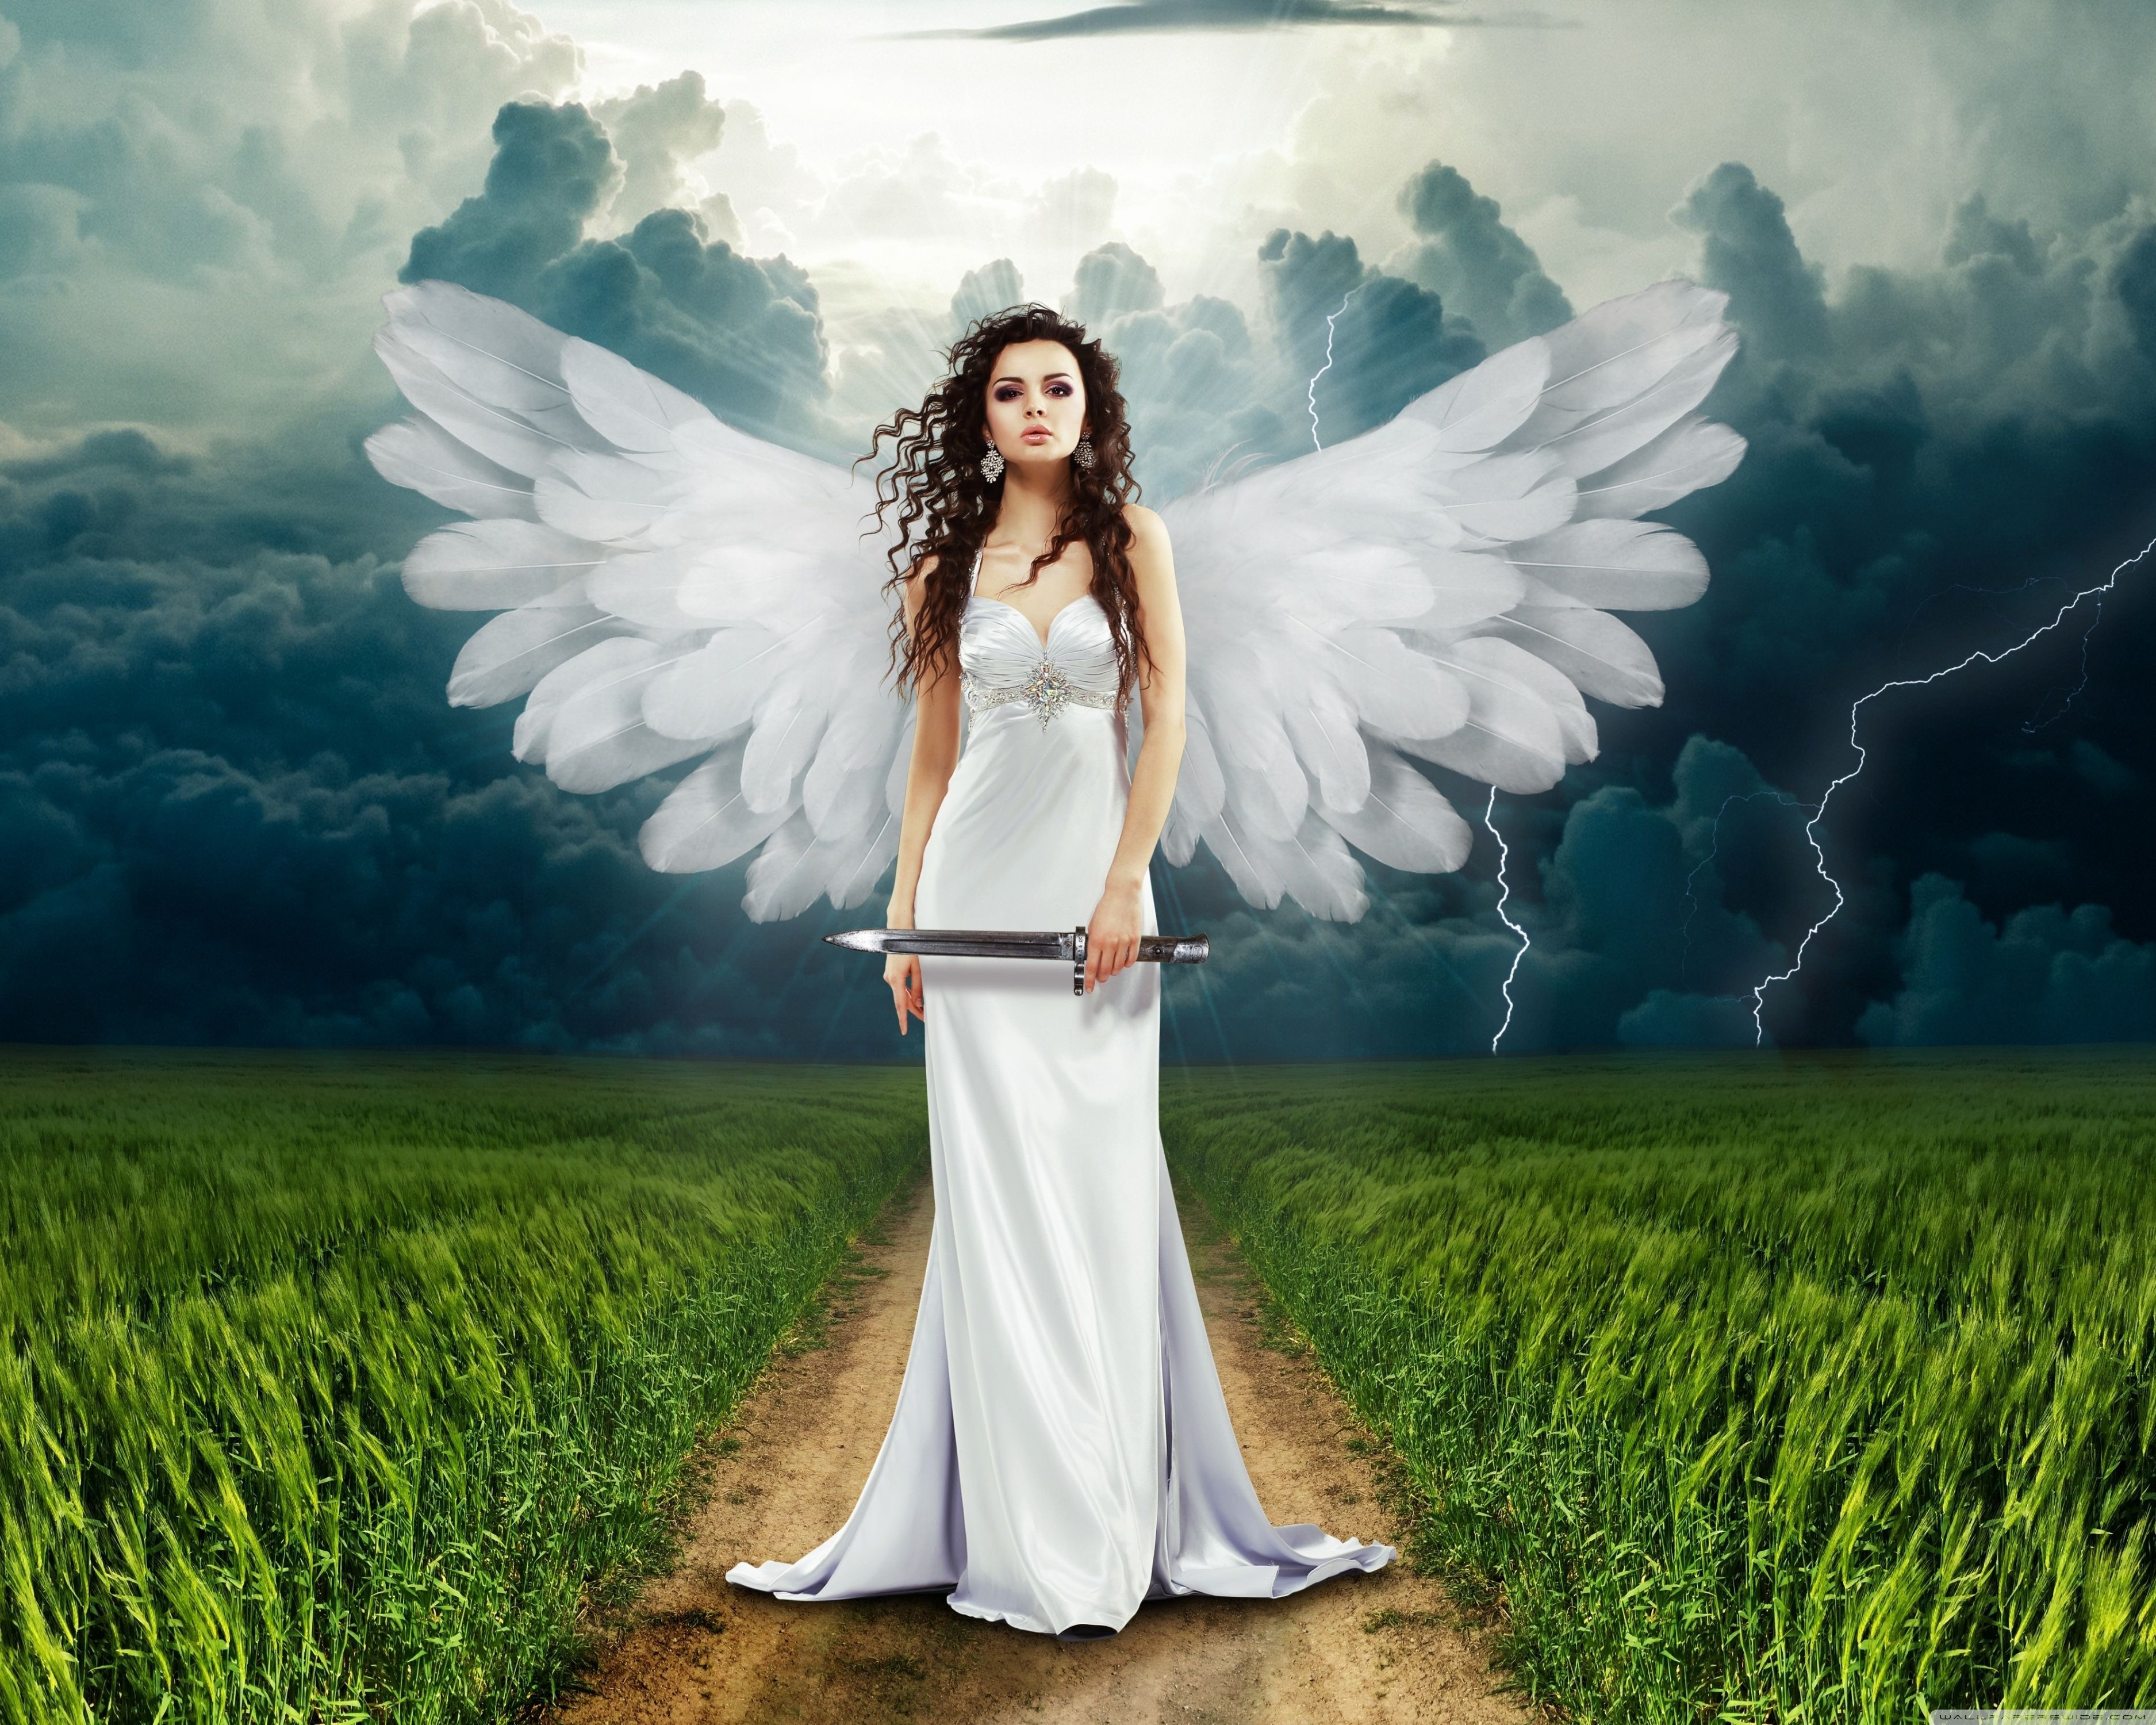 Page 9 | Beautiful Angels In Heaven Images - Free Download on Freepik